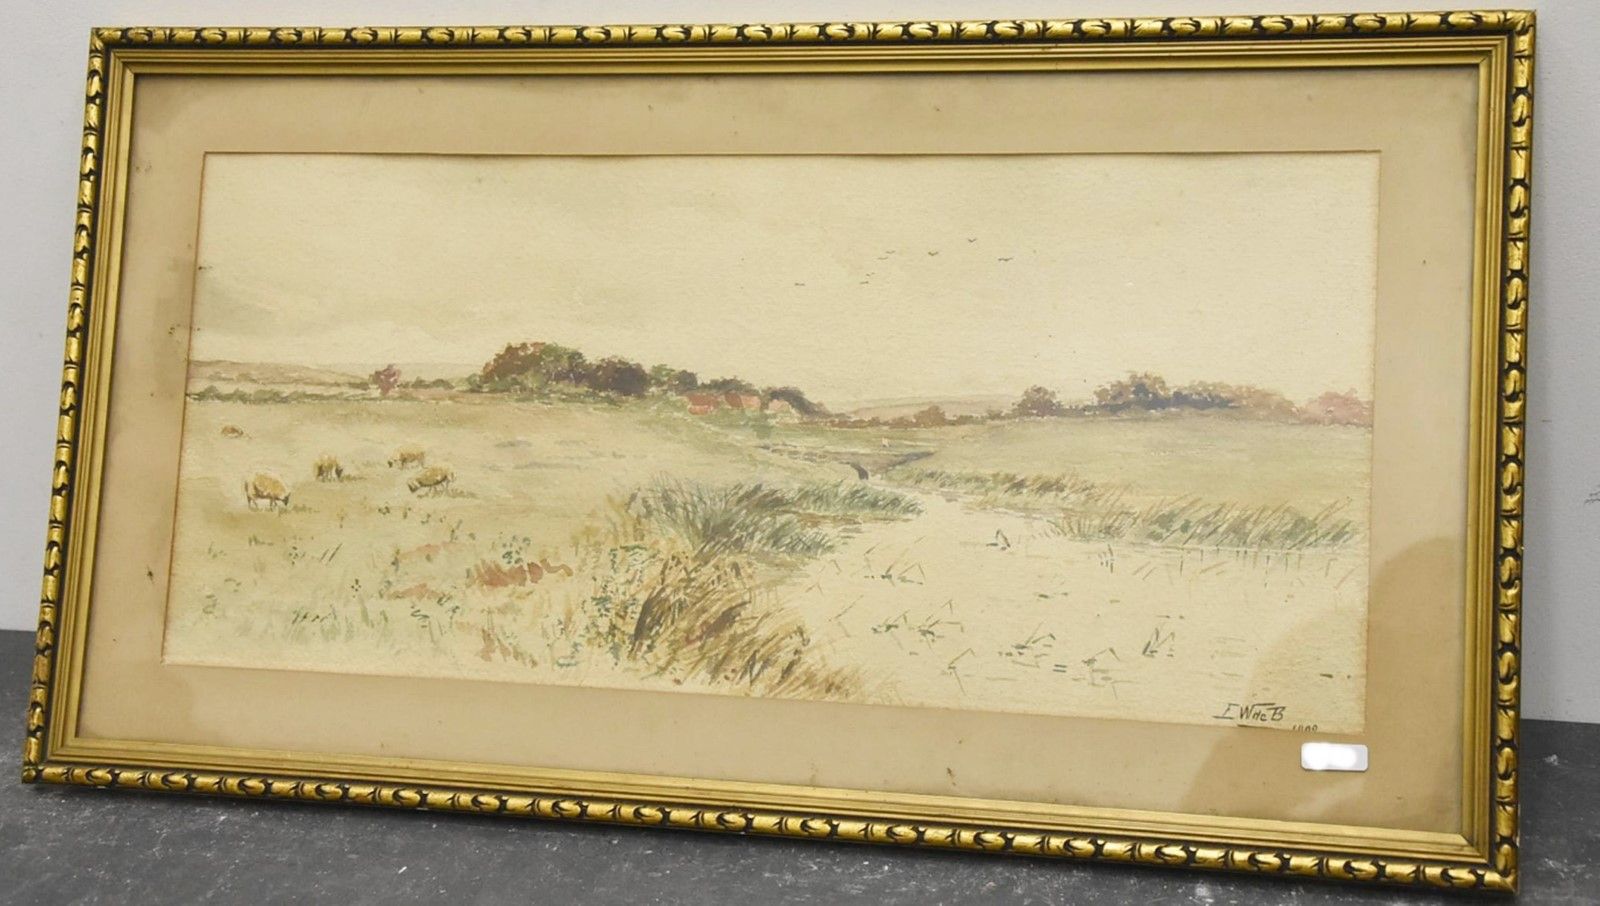 Null "Dune Landscape with Sheep "Watercolor,monogrammed EW de B, dated 1909,ca.2&hellip;